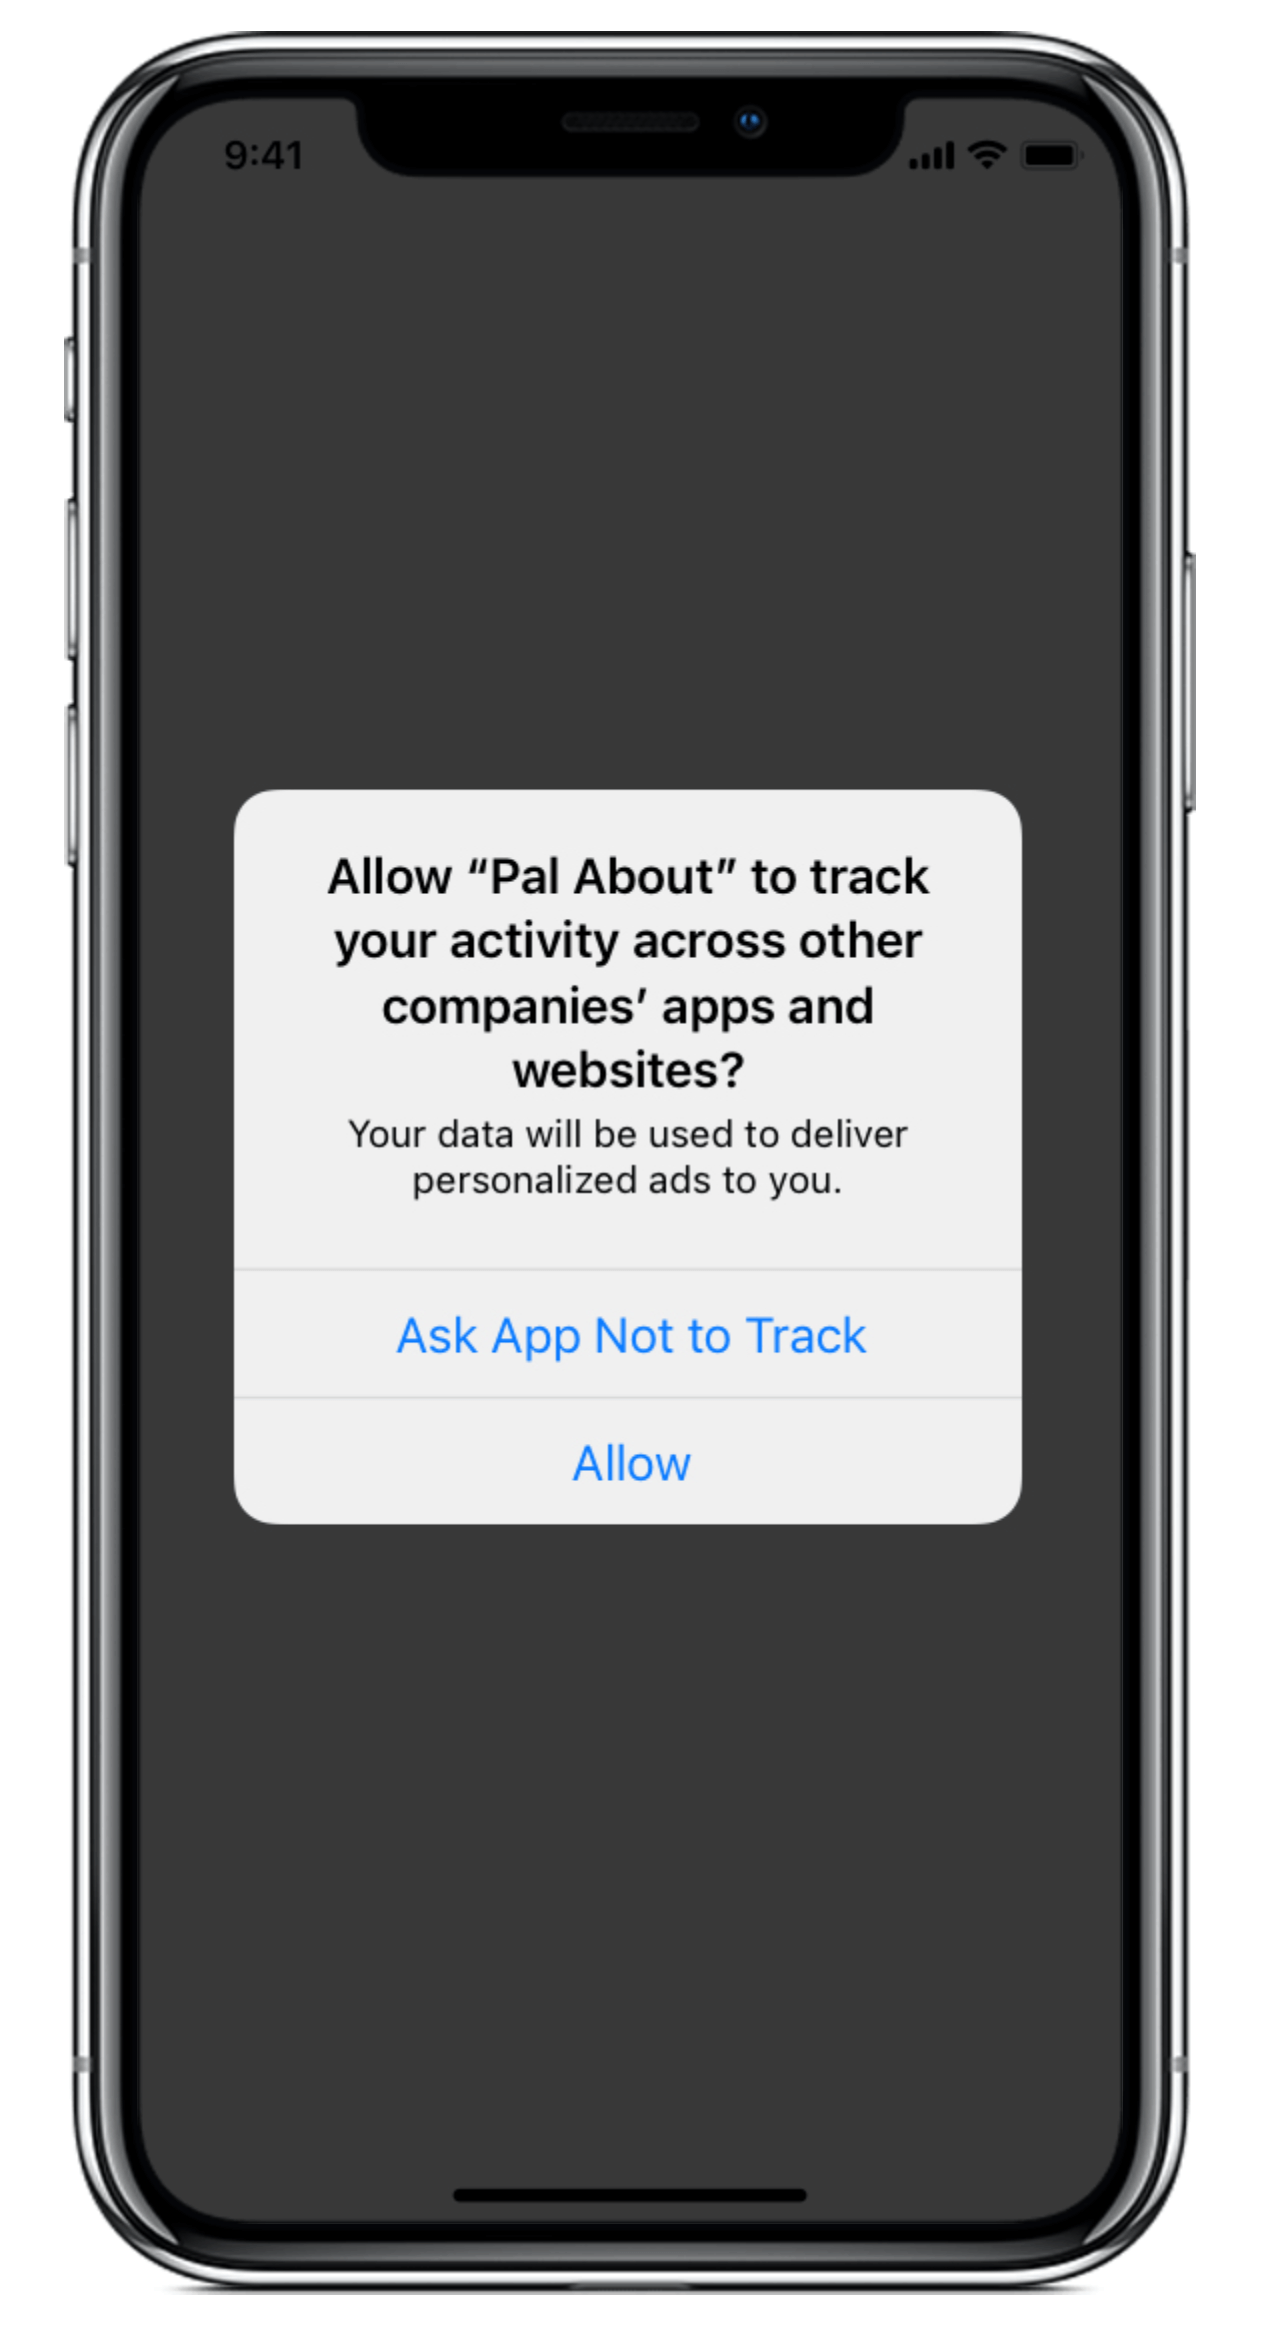 A screenshot of an iPhone app asking for permission to track the user across other companies’ apps and websites to deliver personalized ads